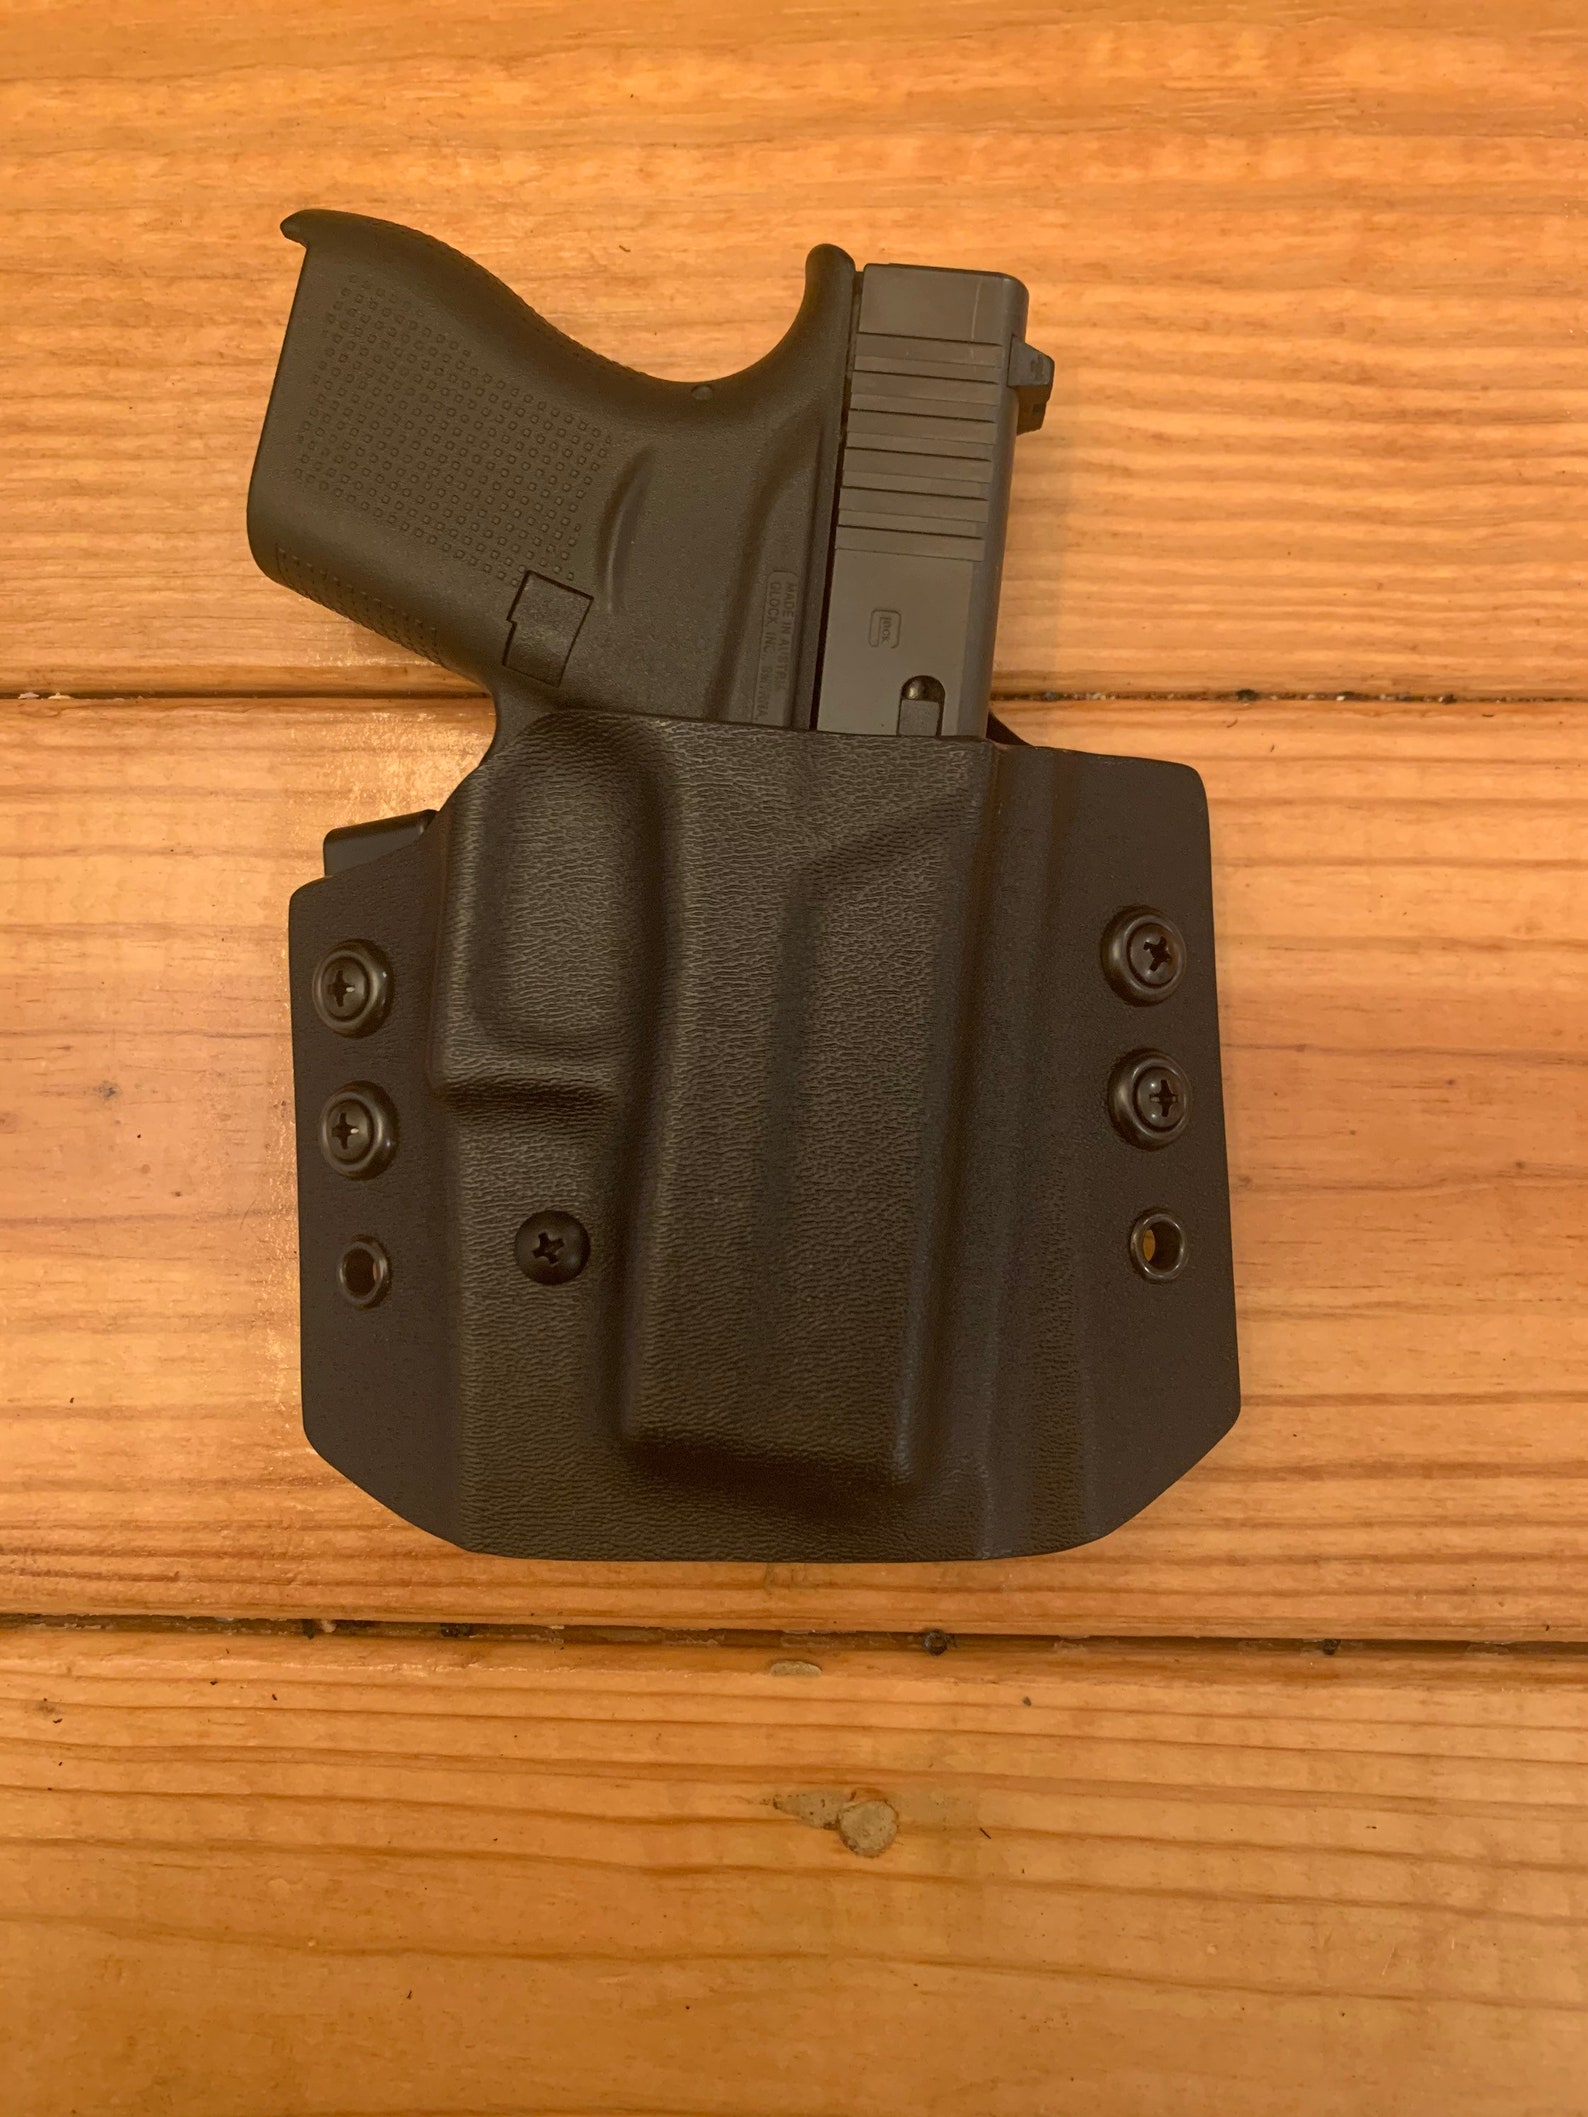 OWB Kydex Holster for Glock 43 and 43x Etsy